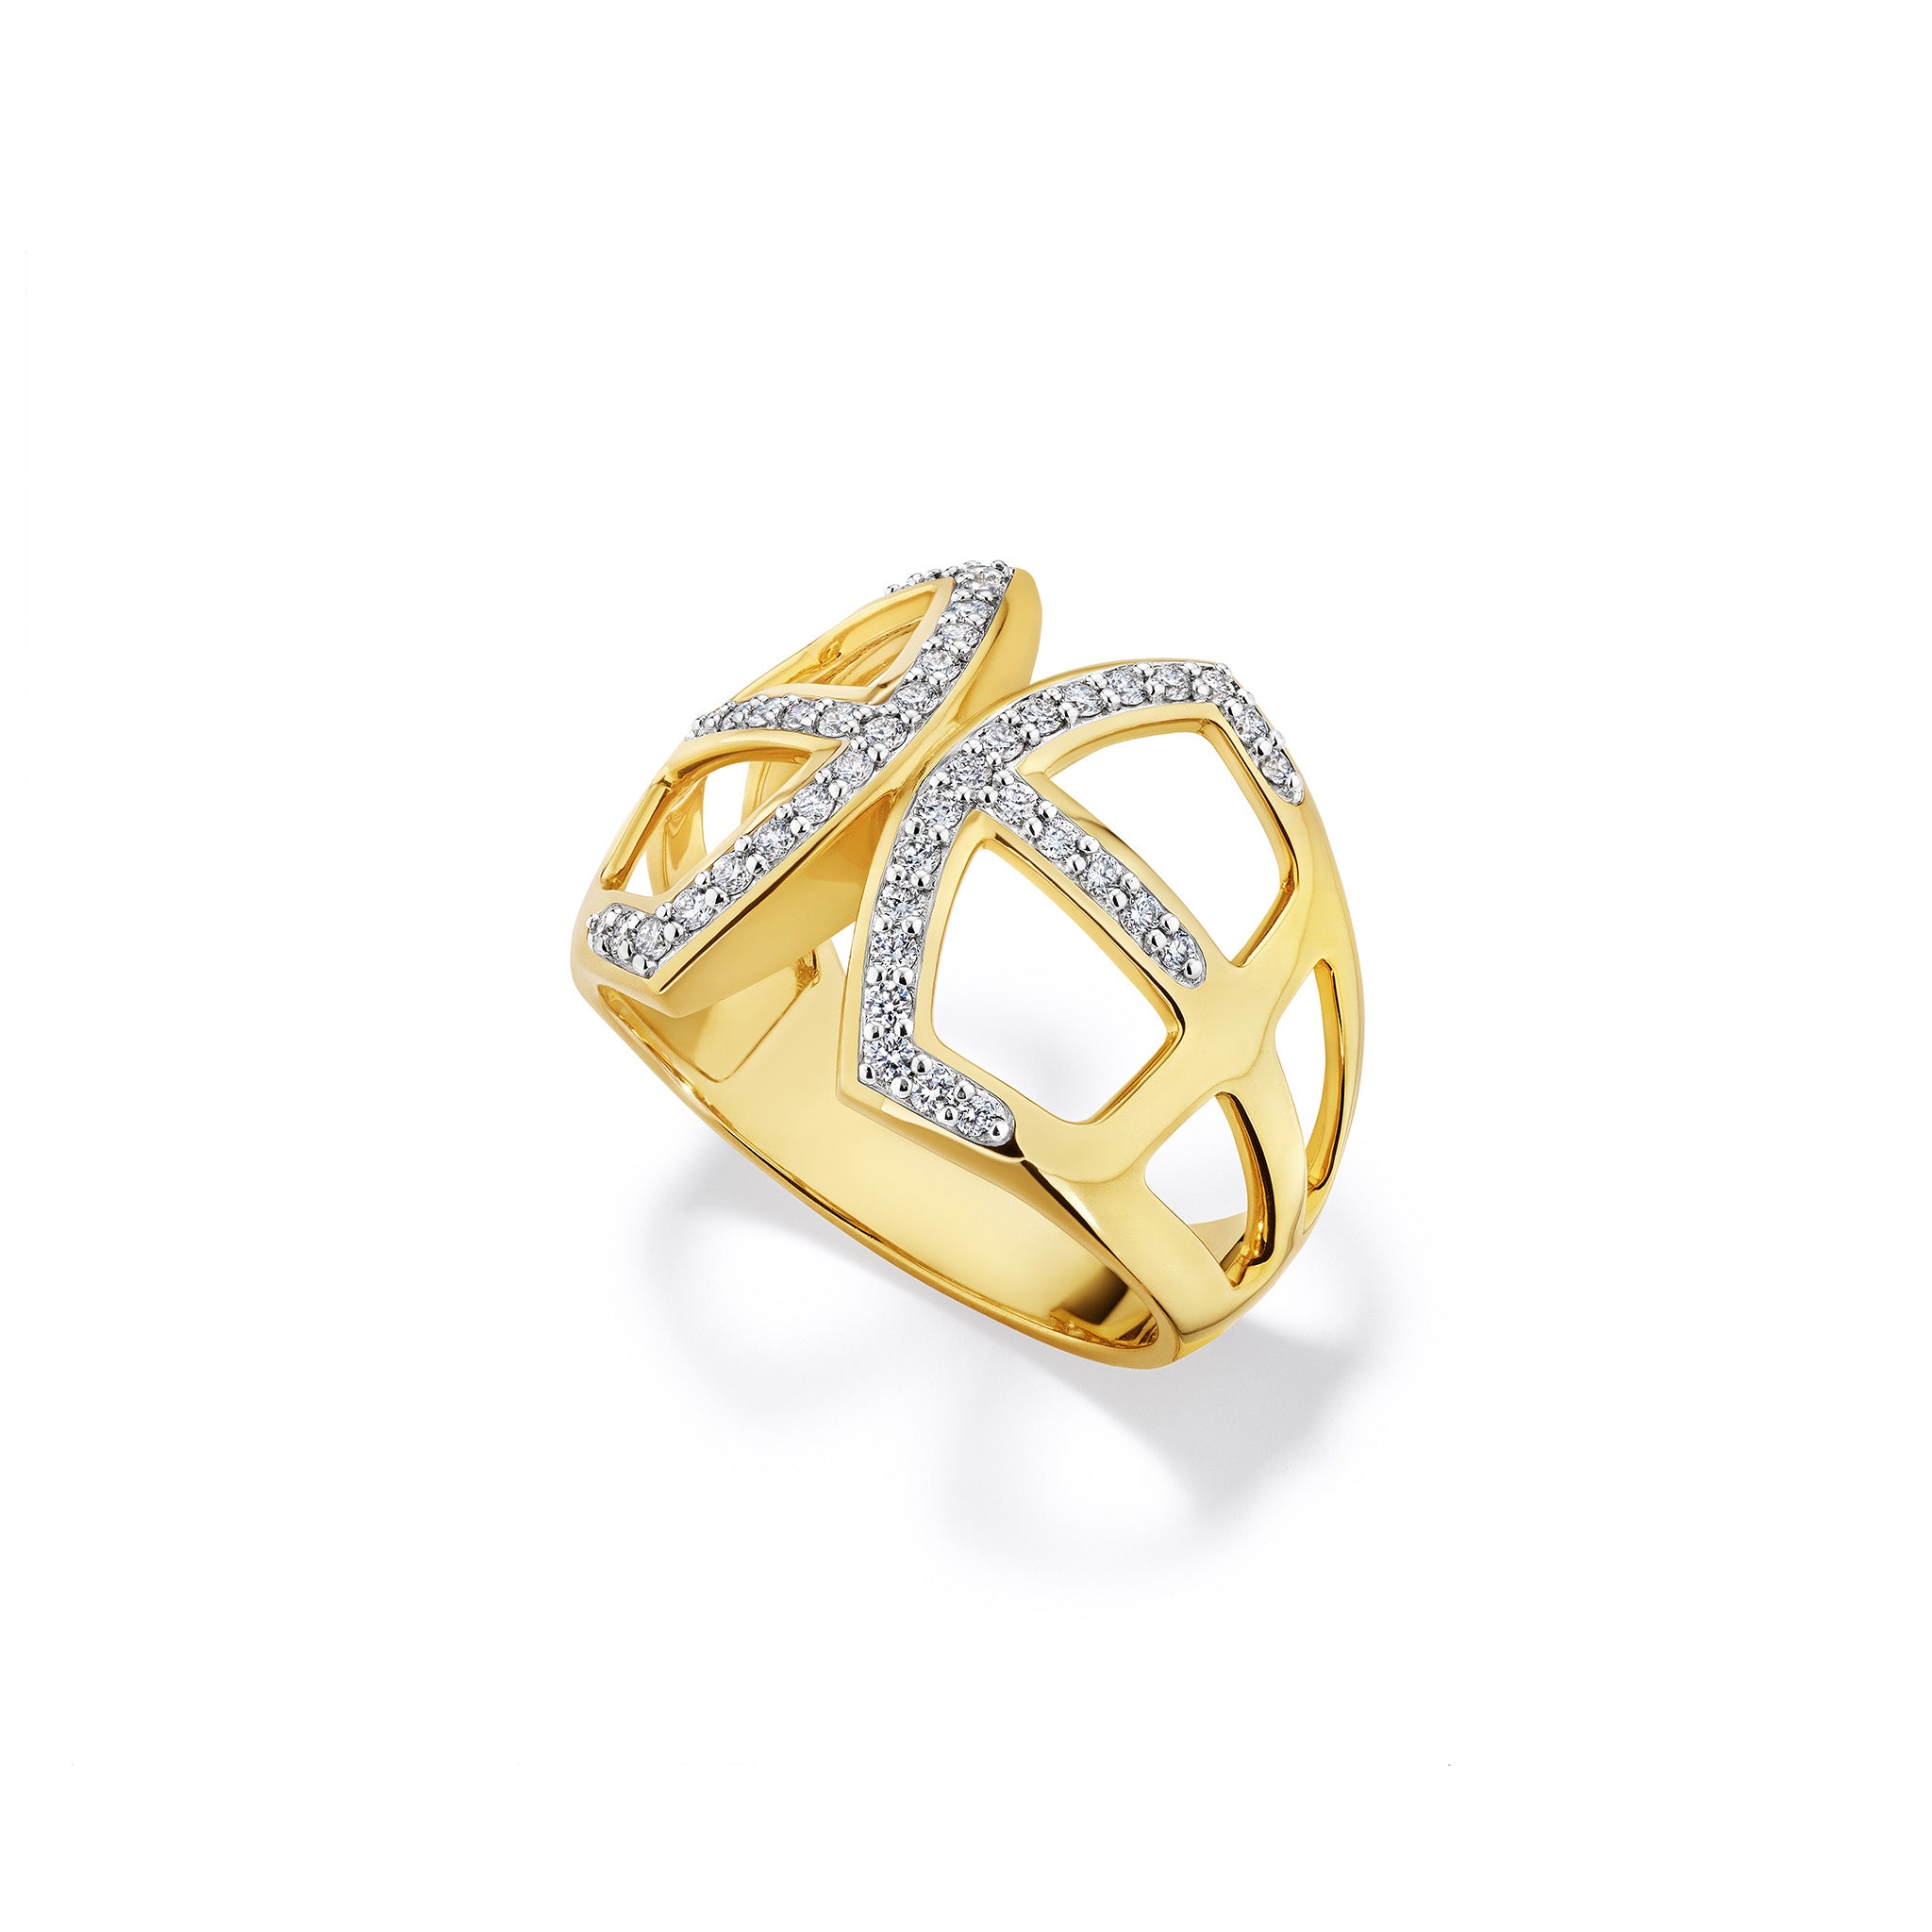 Selvaggia Wide Band Ring with Diamonds in 14K